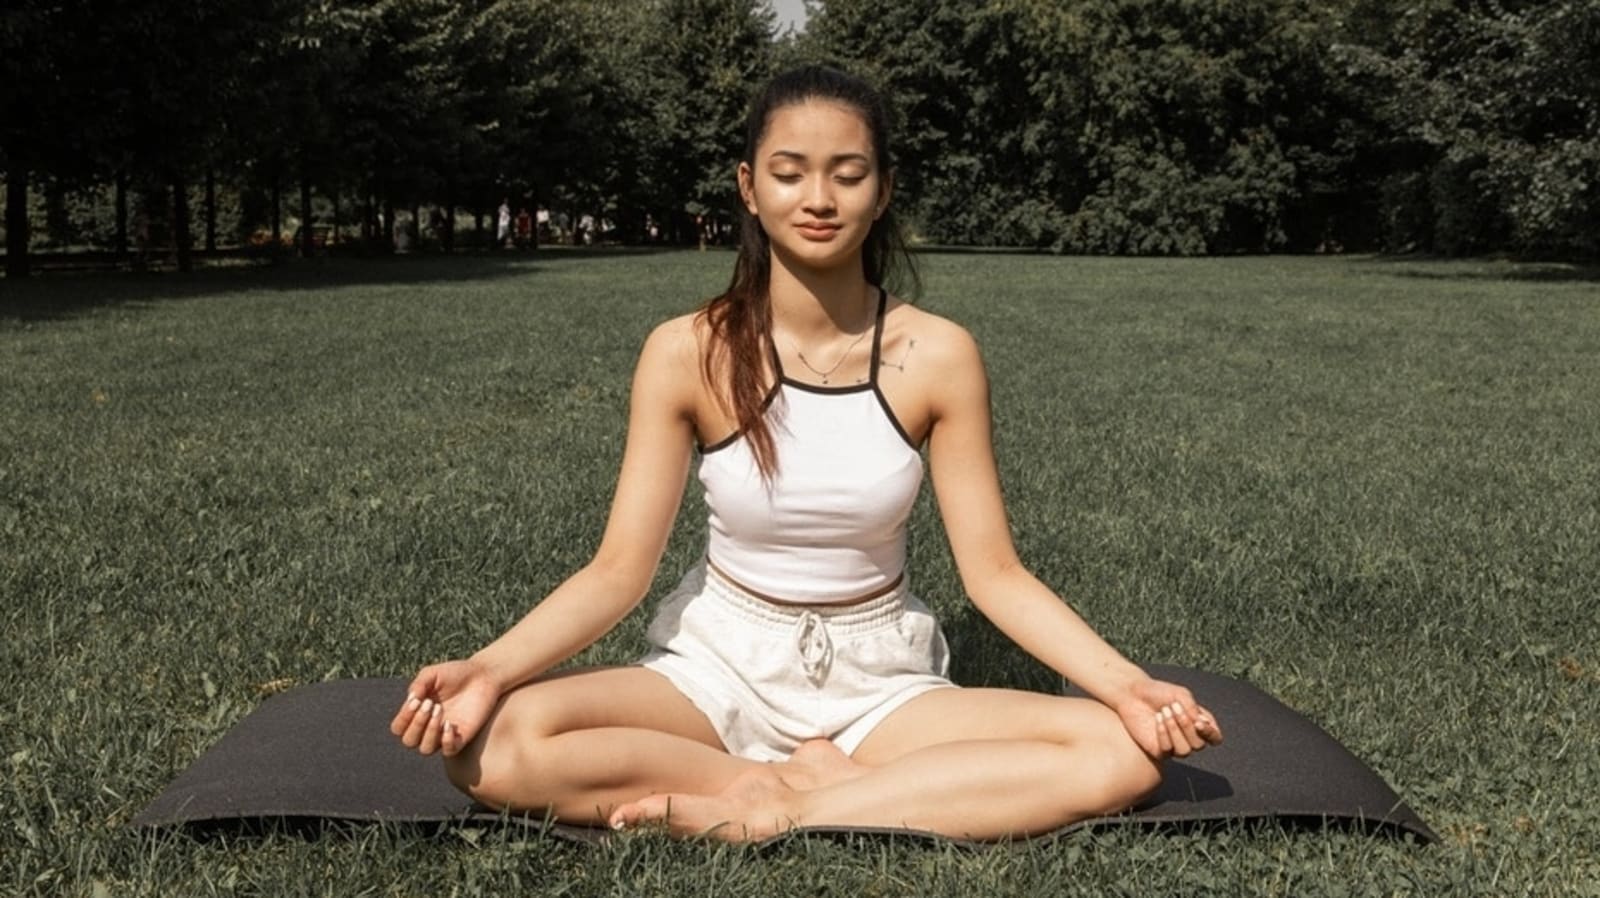 Meditation guide: 7 simple steps to meditate for beginners